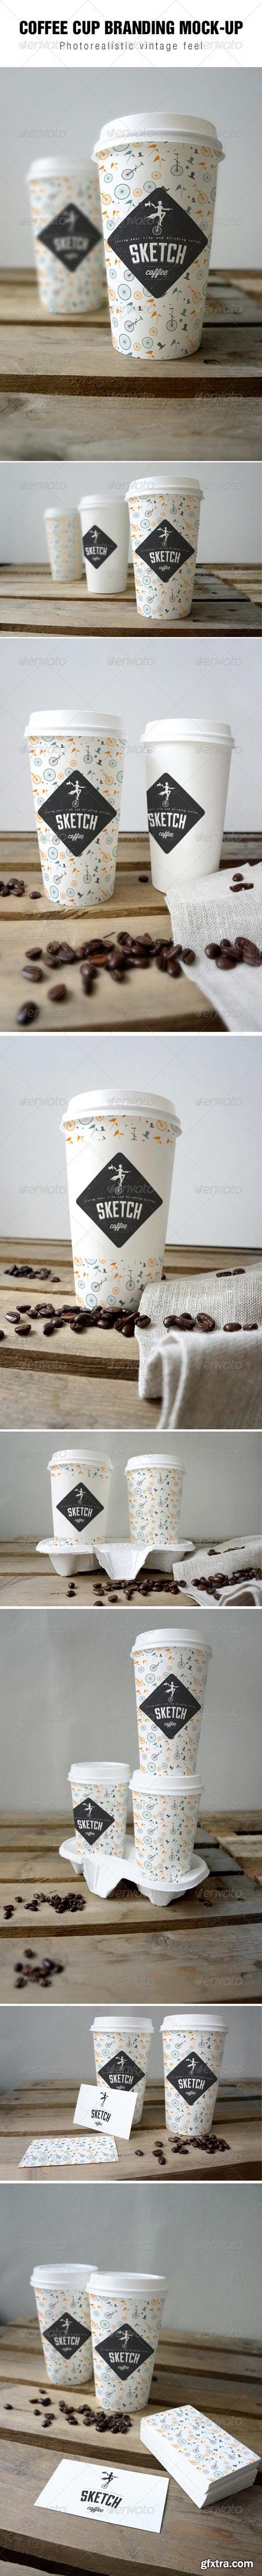 GraphicRiver - Coffee cup branding Mock-up 6994678